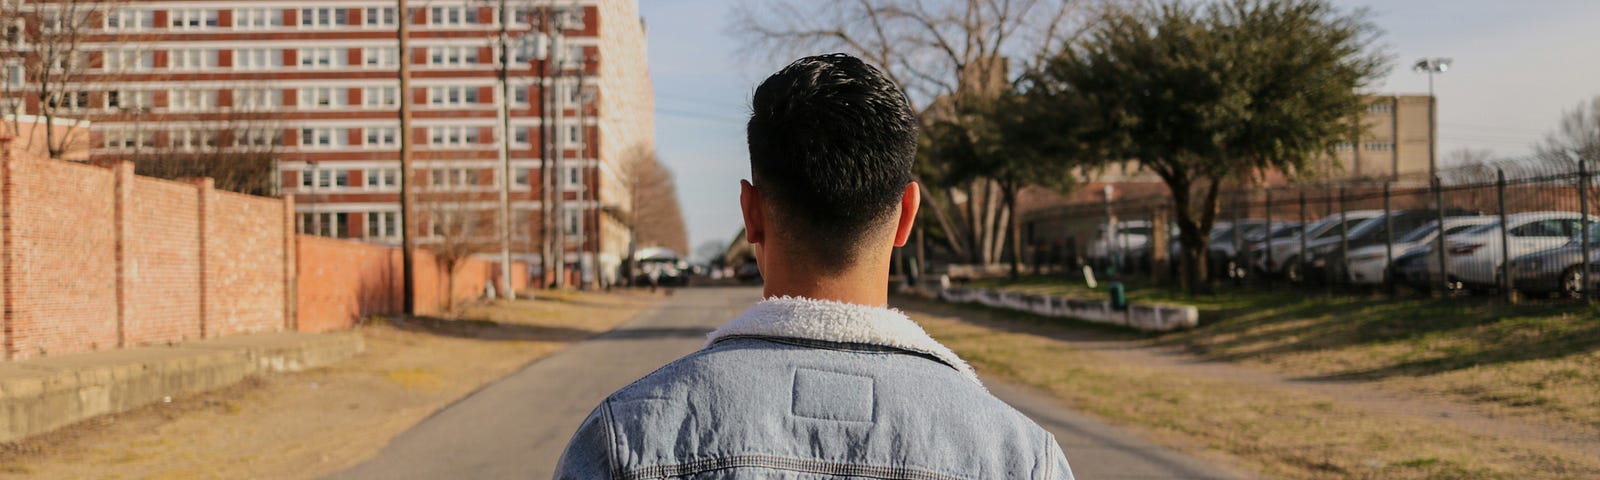 A man with short hair wearing a denim jacket. The man is facing away from the camera looking at an empty road ahead of him. There are buildings and a car park on the side of the road.